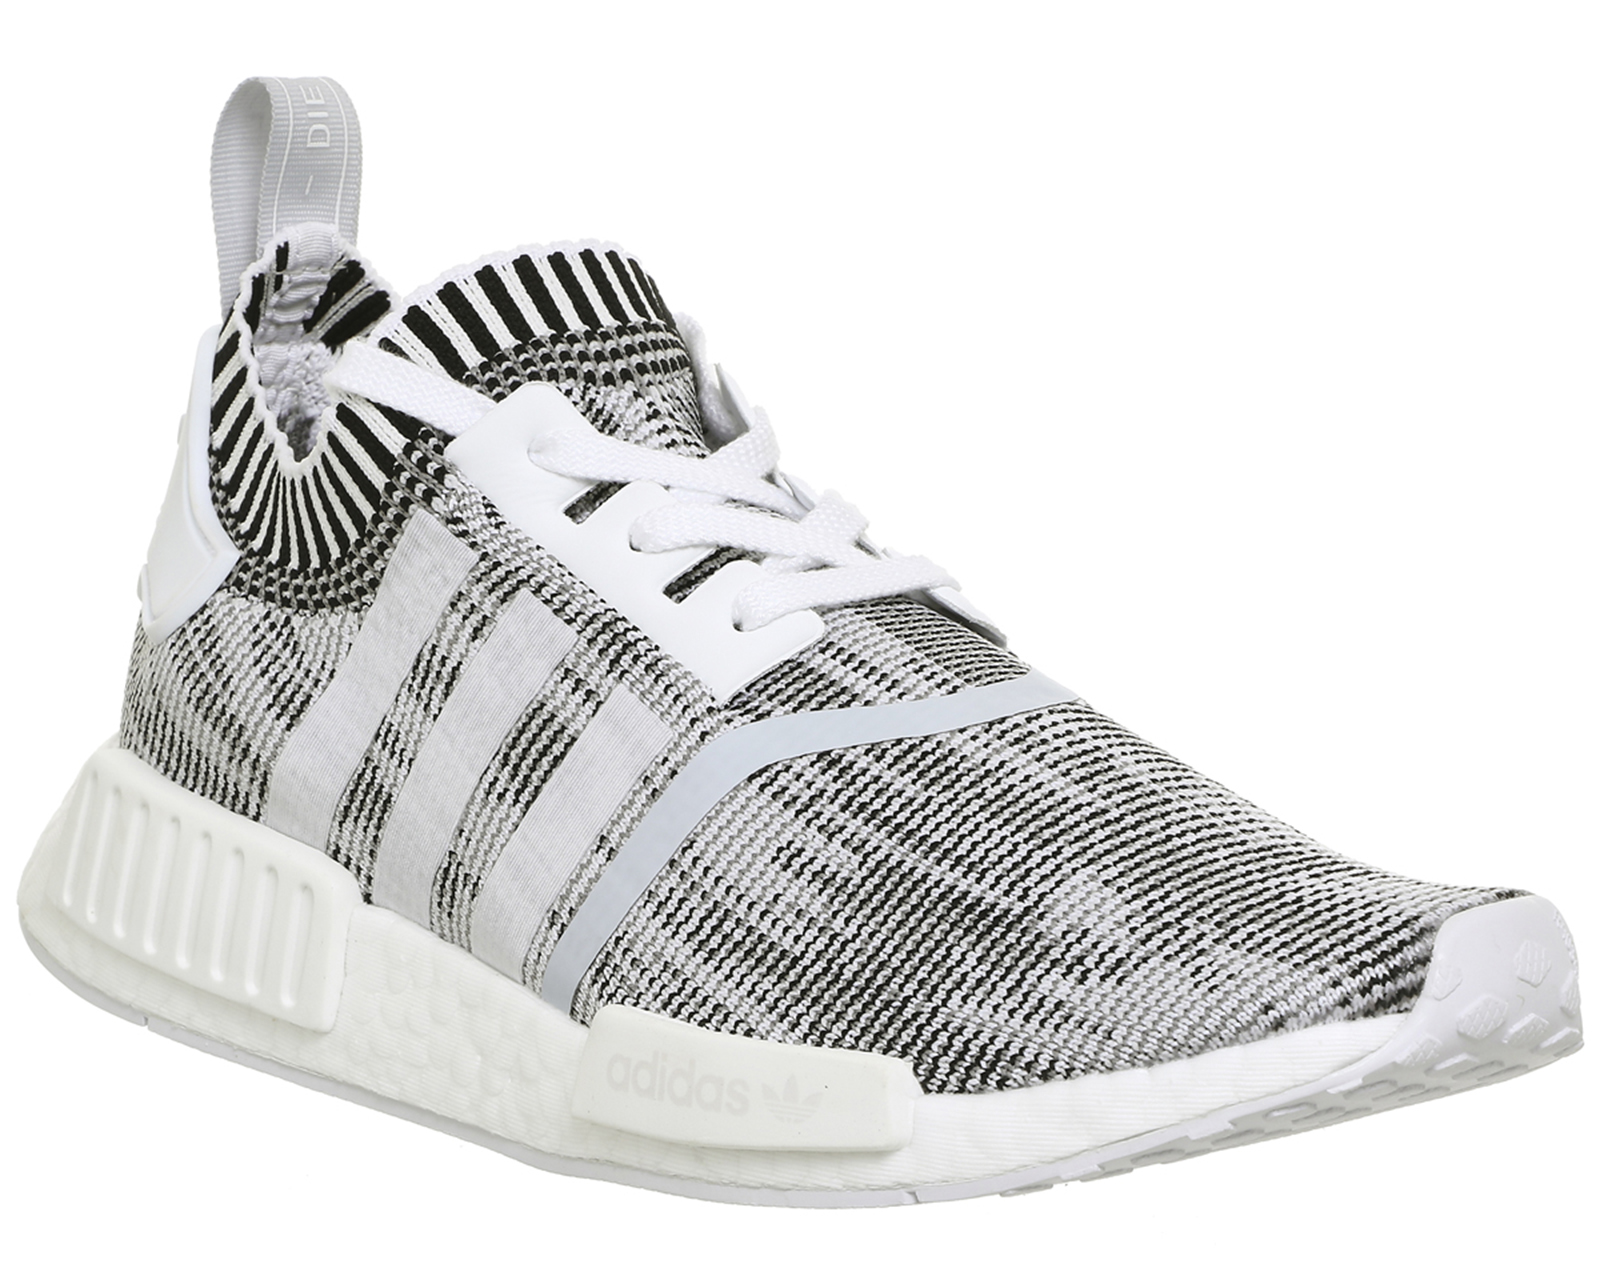 adidas Nmd R1 Prime Knit White White Black - His trainers